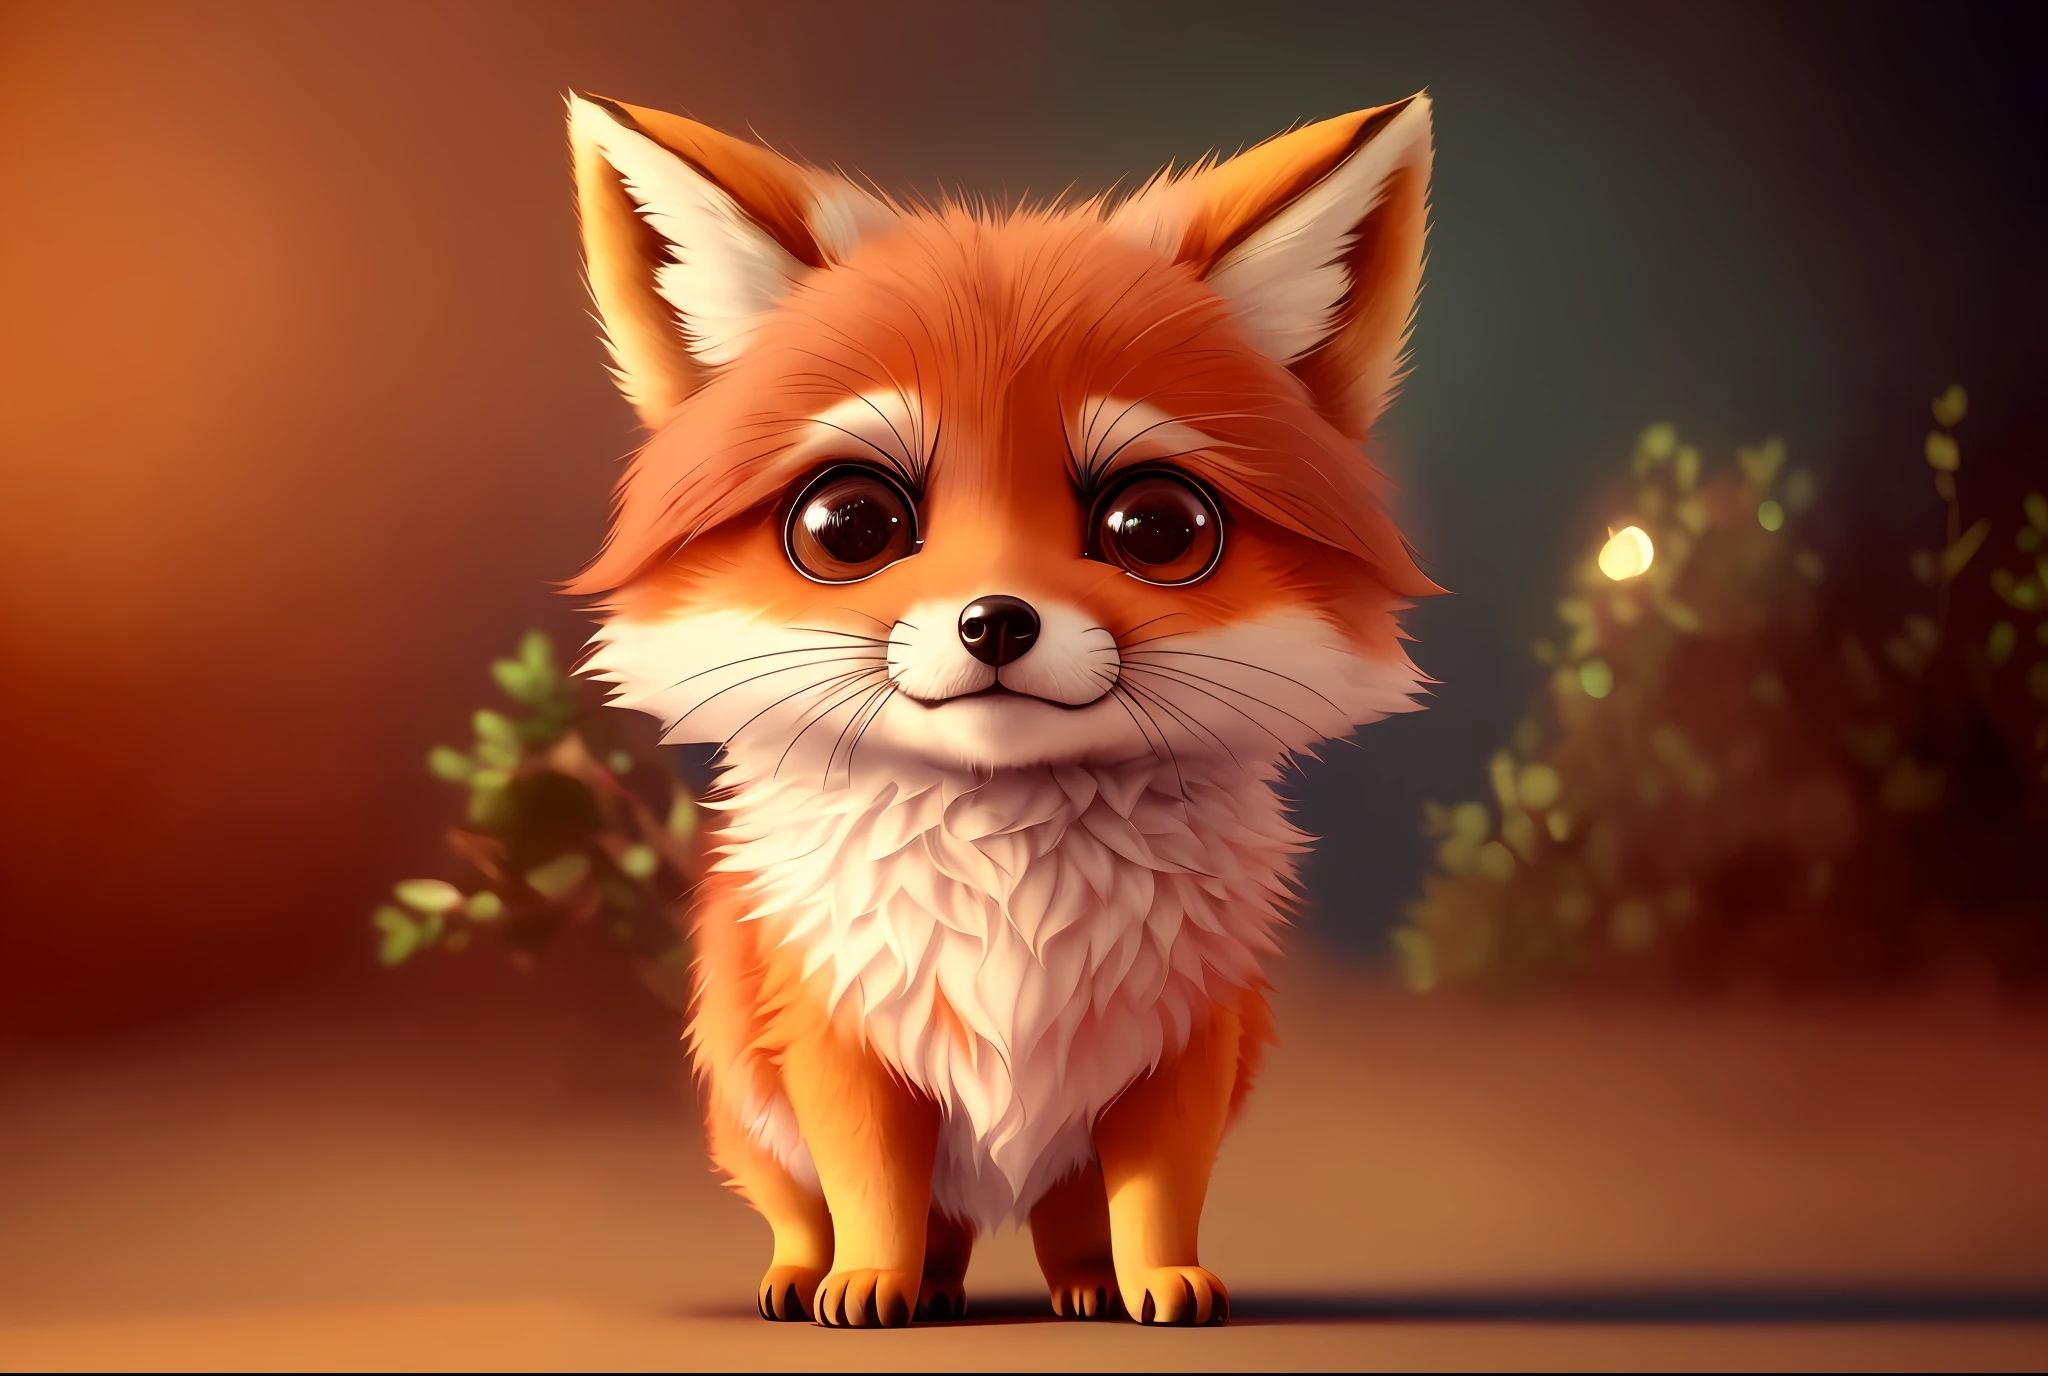 a little furry animal with big eyes and a nose, adorable digital painting, cute fox, cute animal, cute detailed digital art, cute digital art, cute creature, cute cartoon character, cute forest creature, cute single animal, cute artwork, the cutest creature of the world, the cutest creature in the world, cute 3 d render, cute large eyes